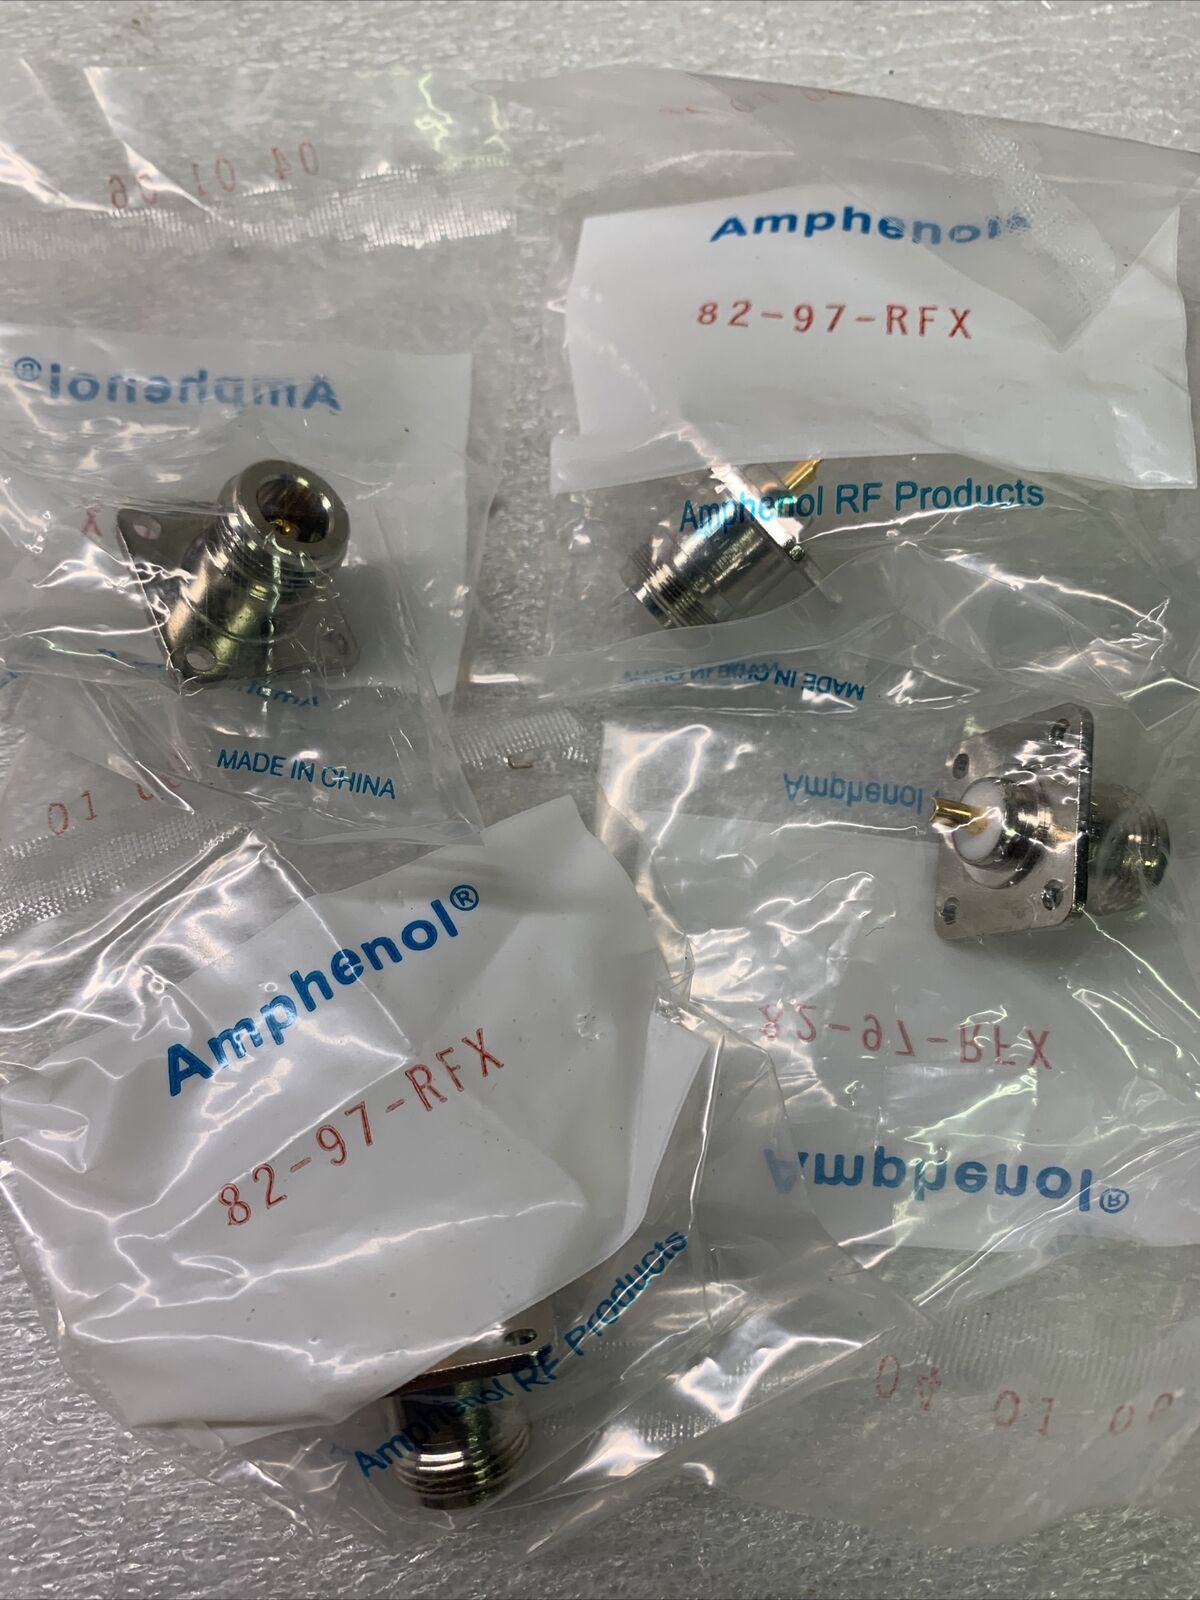 (LOT OF 4) Amphenol, 82-97-RFX NEW IN BAG 50 OHM IMPEDANCE UP TO 8 SETS OF 4